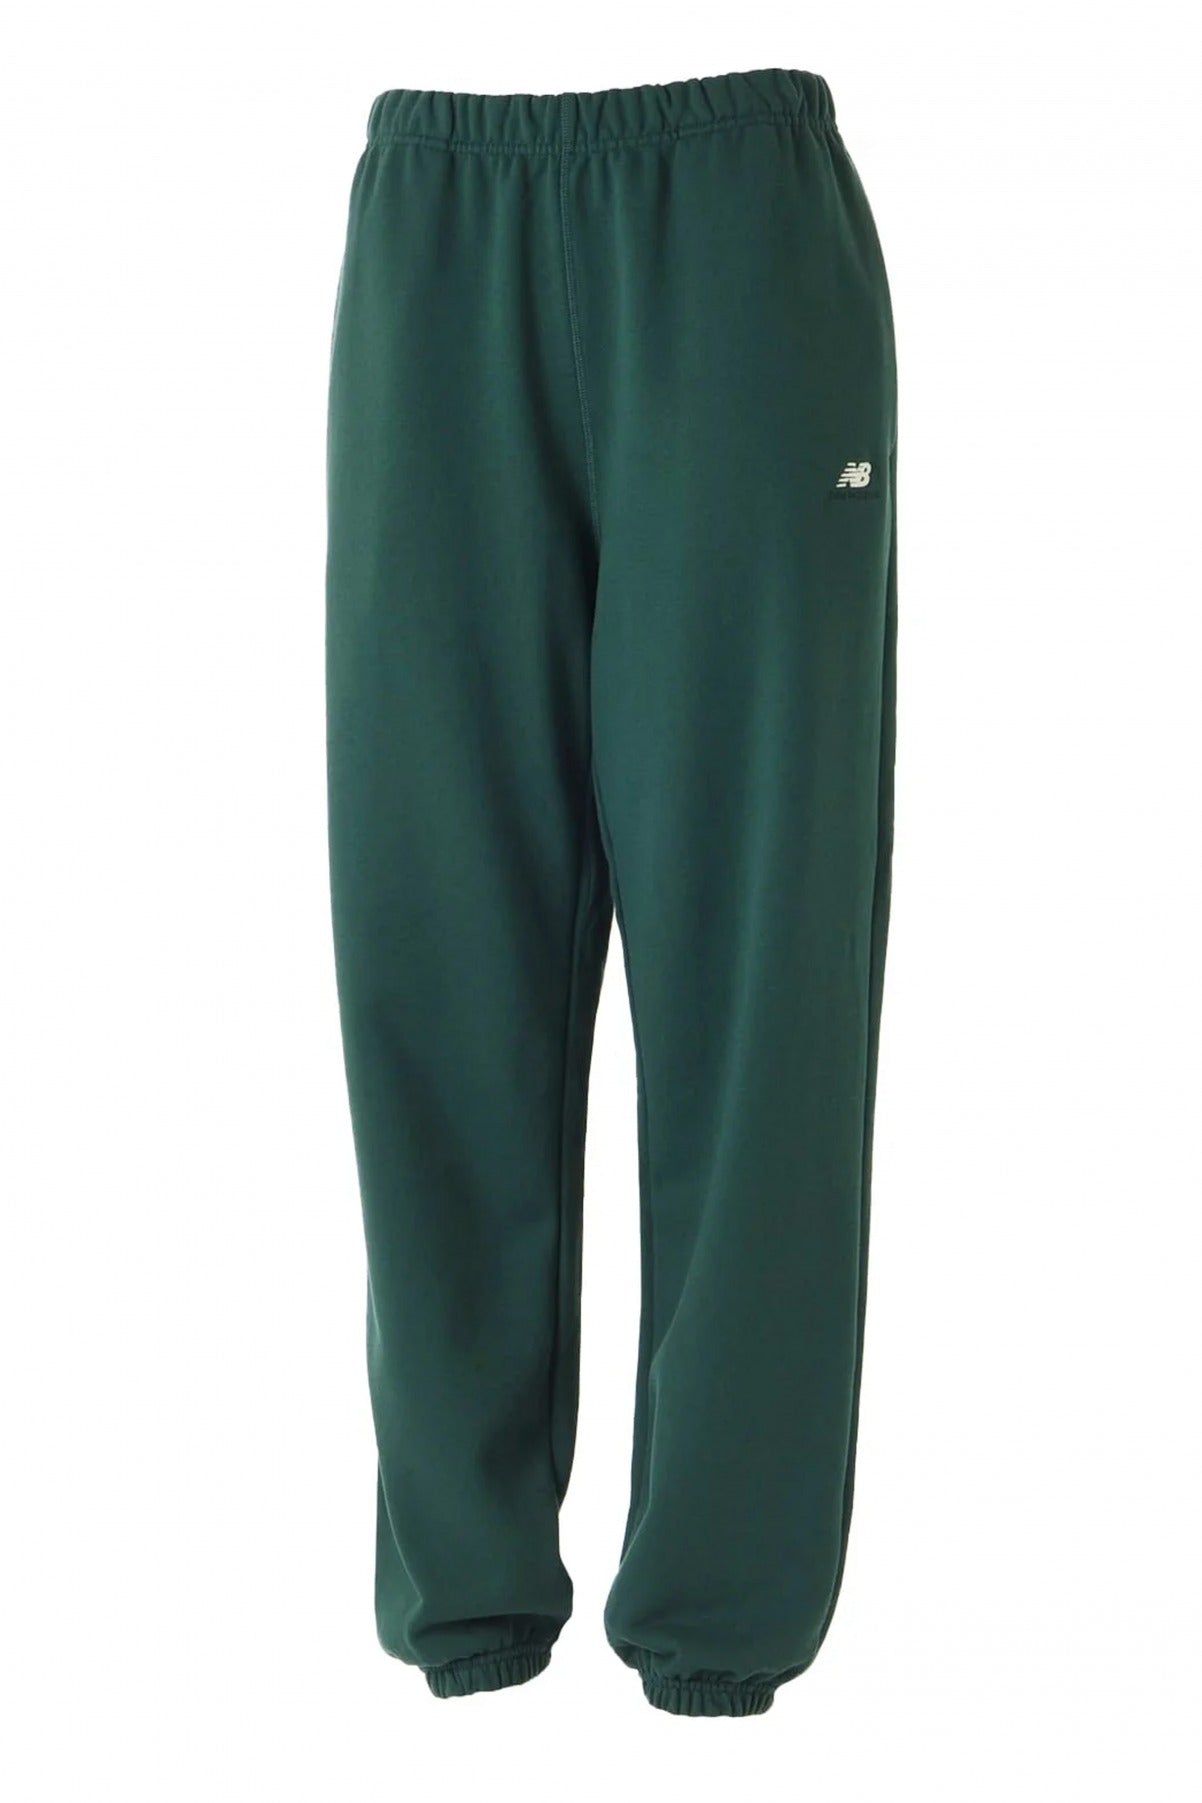 NEW BALANCE ATHLETICS REMASTERED FRENCH TERRY PANT en color VERDE  (2)